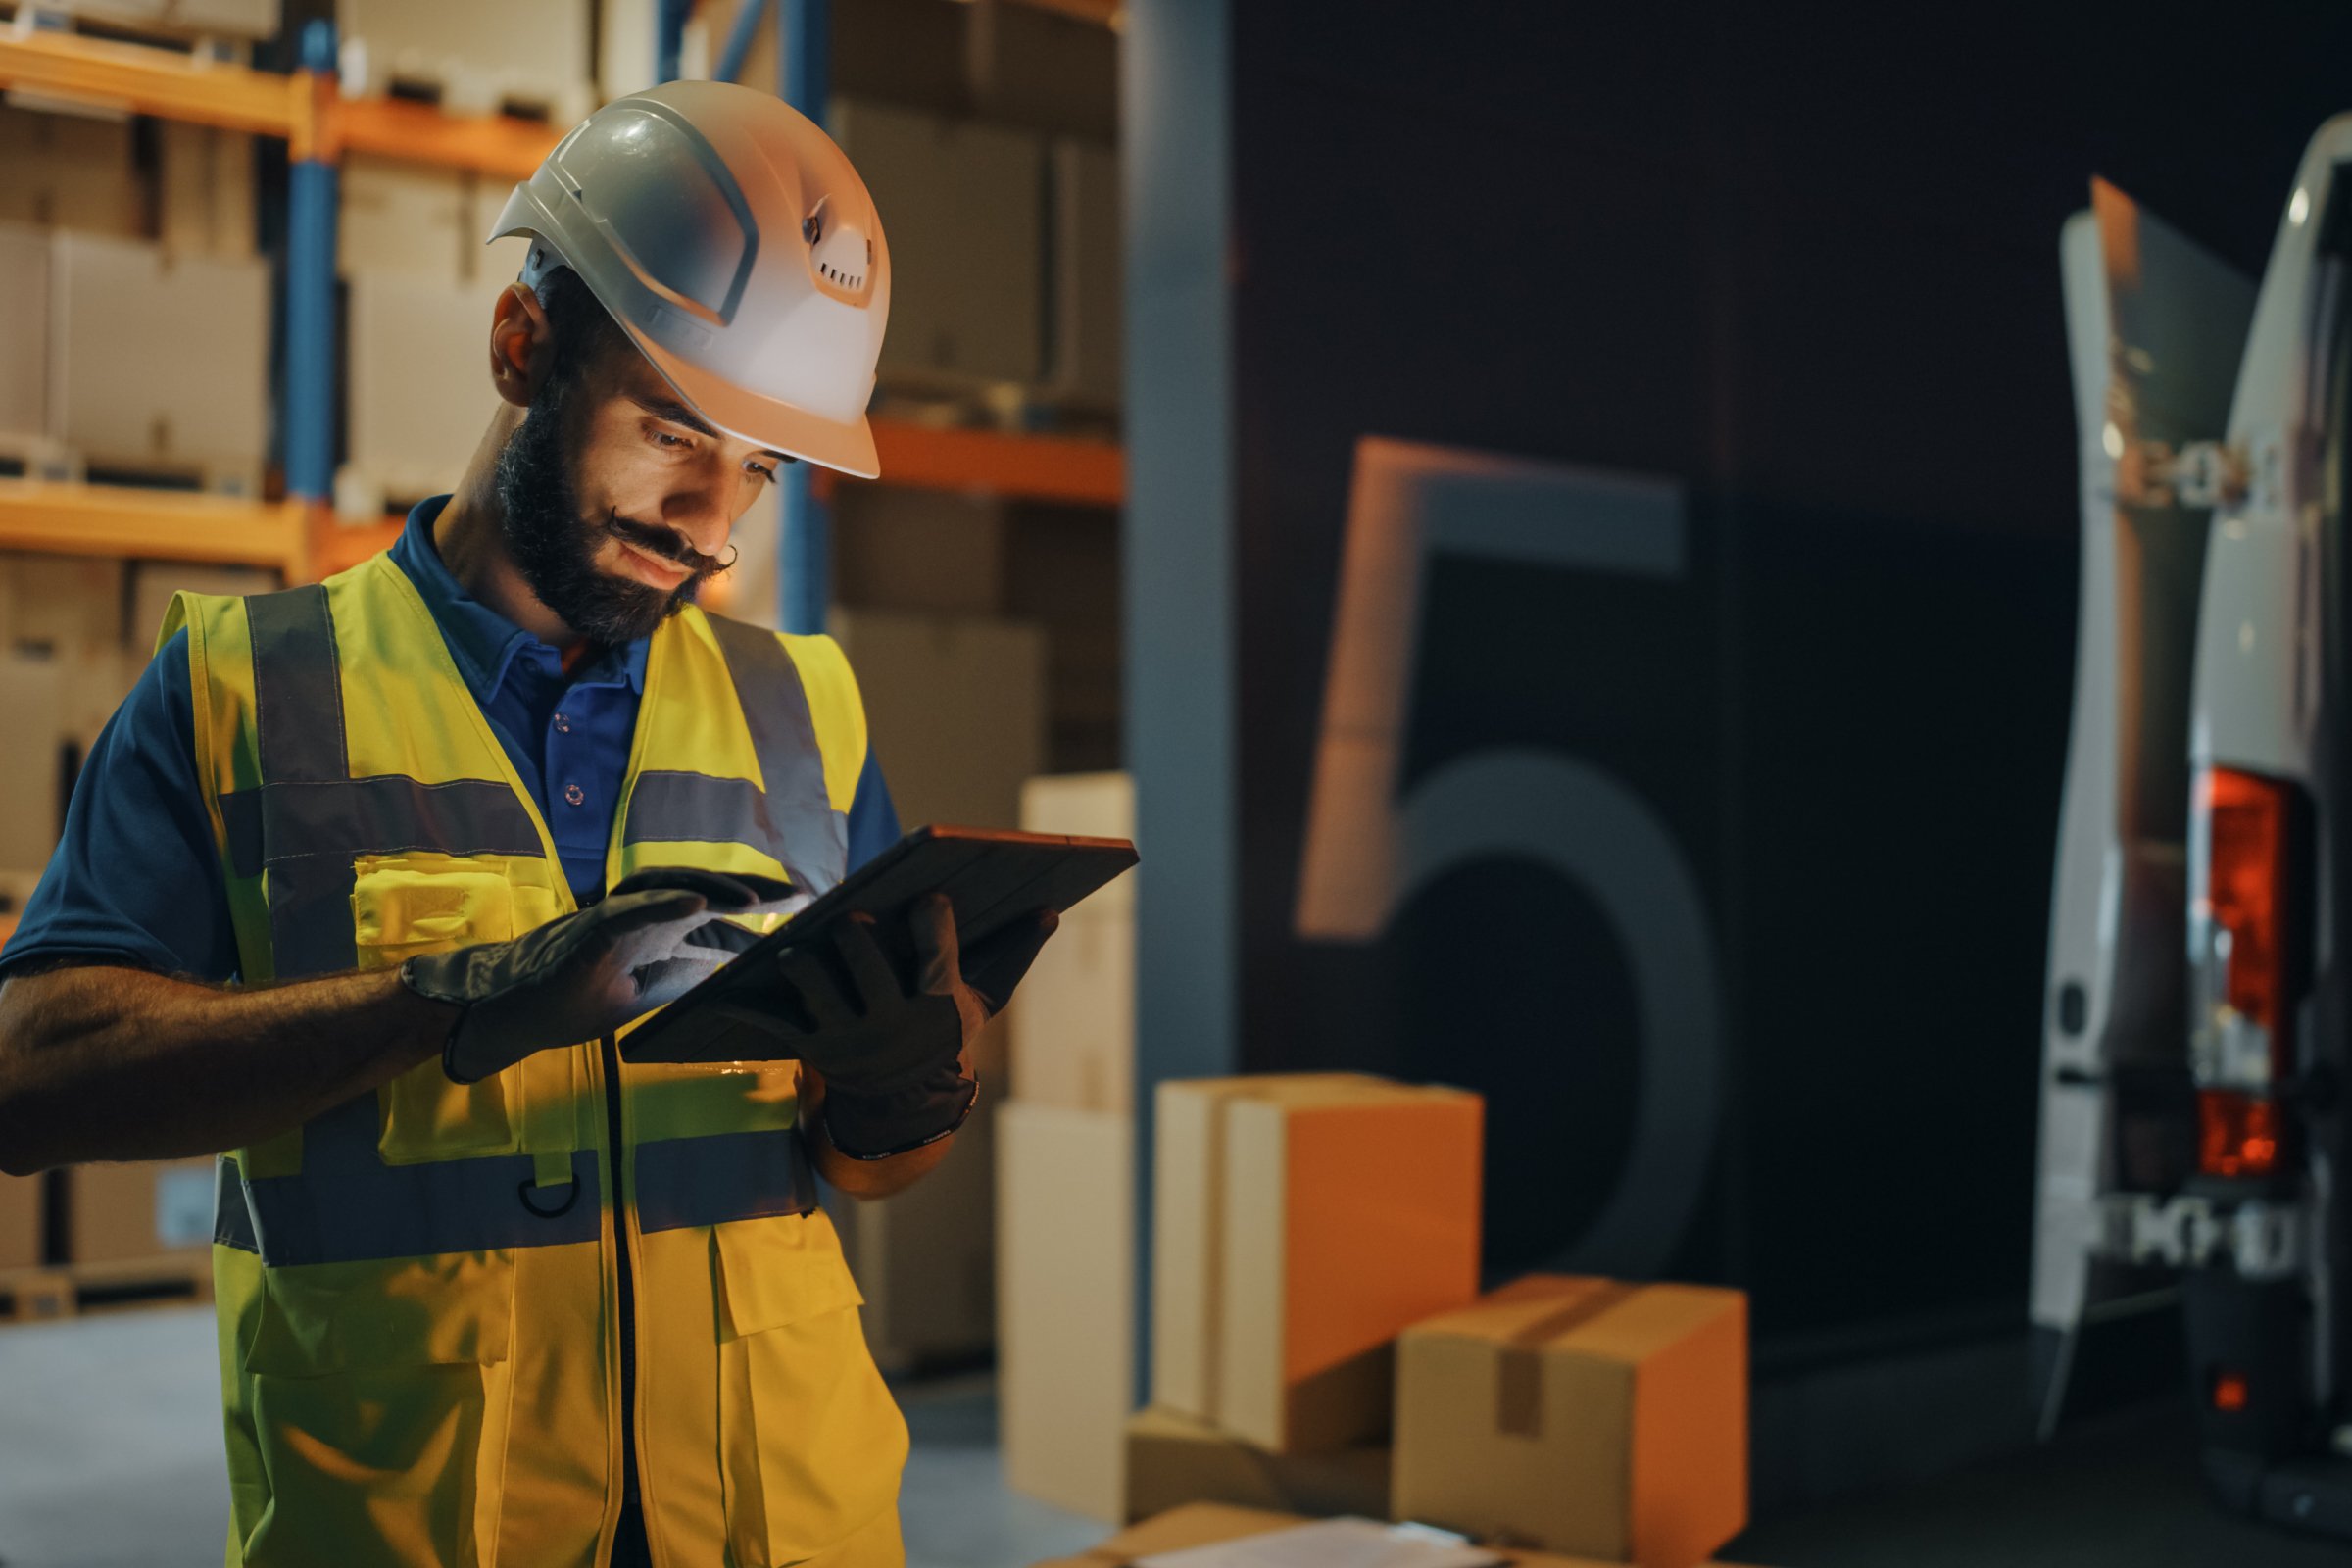 Man with safety vest and helmet looking at e tablet standing in a warehouse